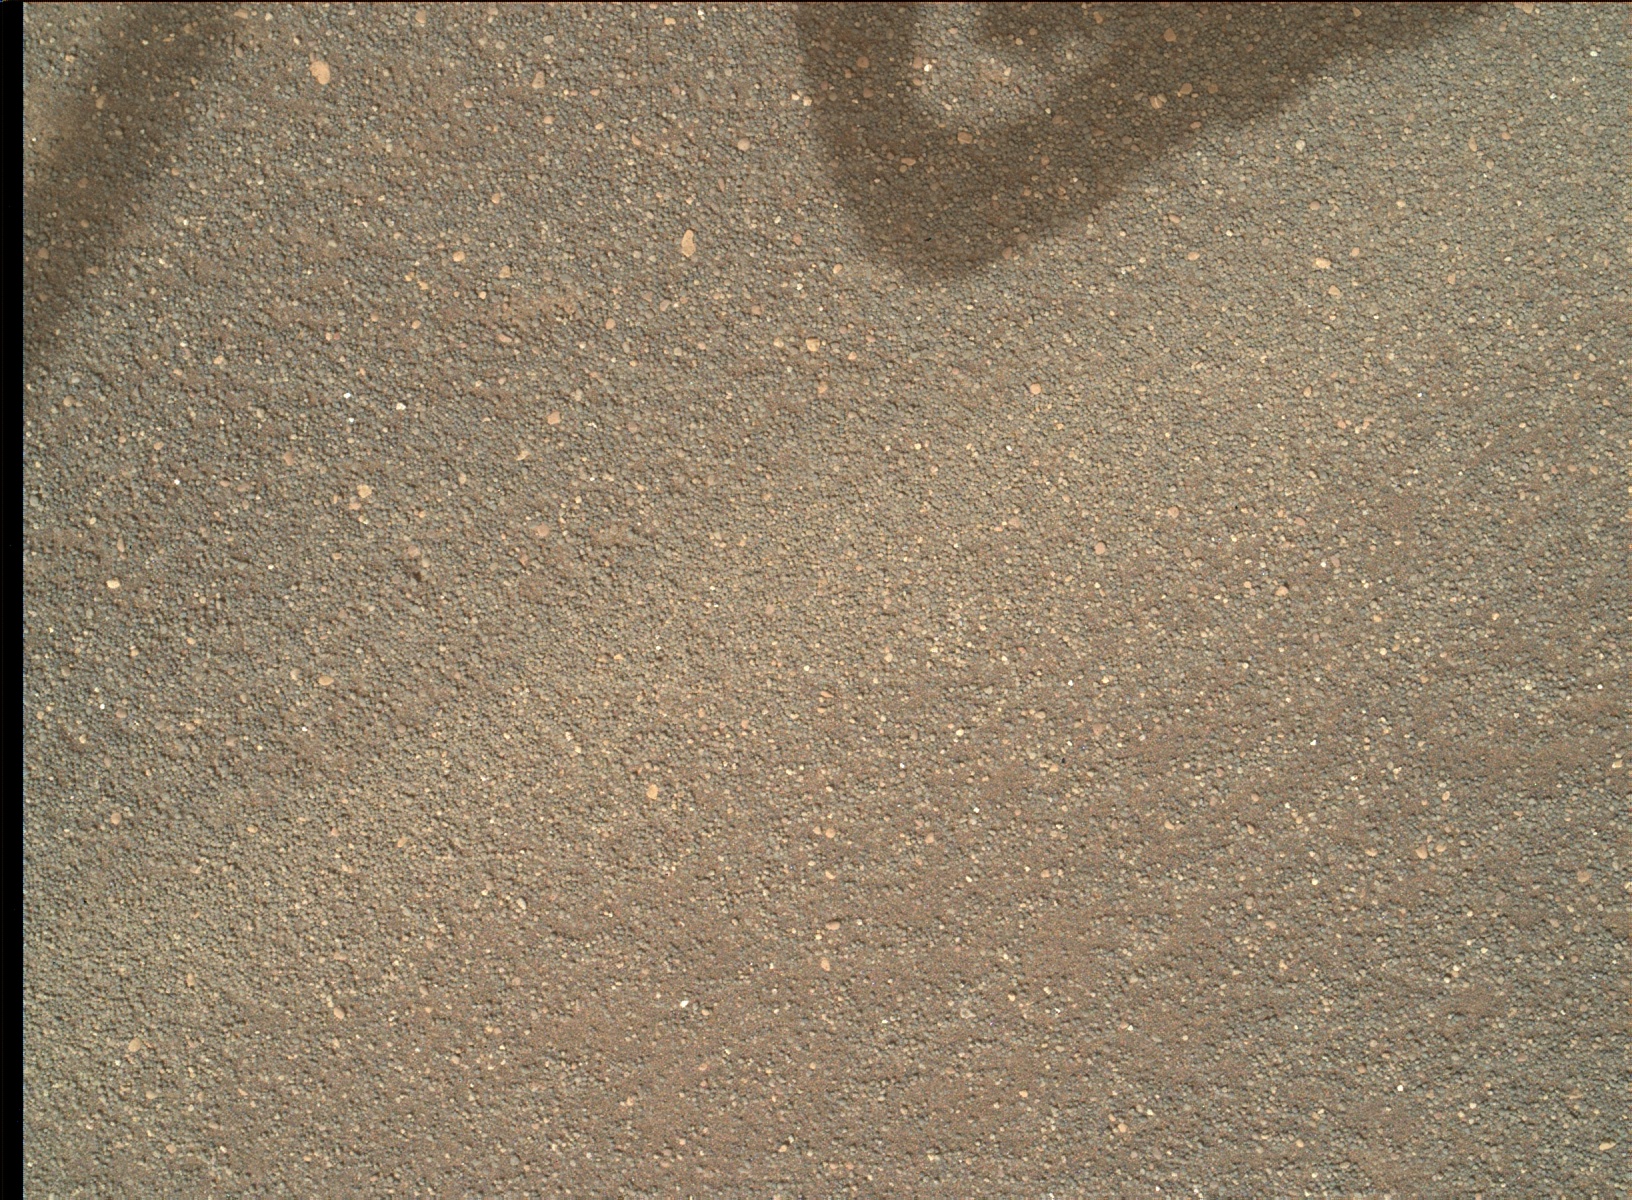 Nasa's Mars rover Curiosity acquired this image using its Mars Hand Lens Imager (MAHLI) on Sol 1688